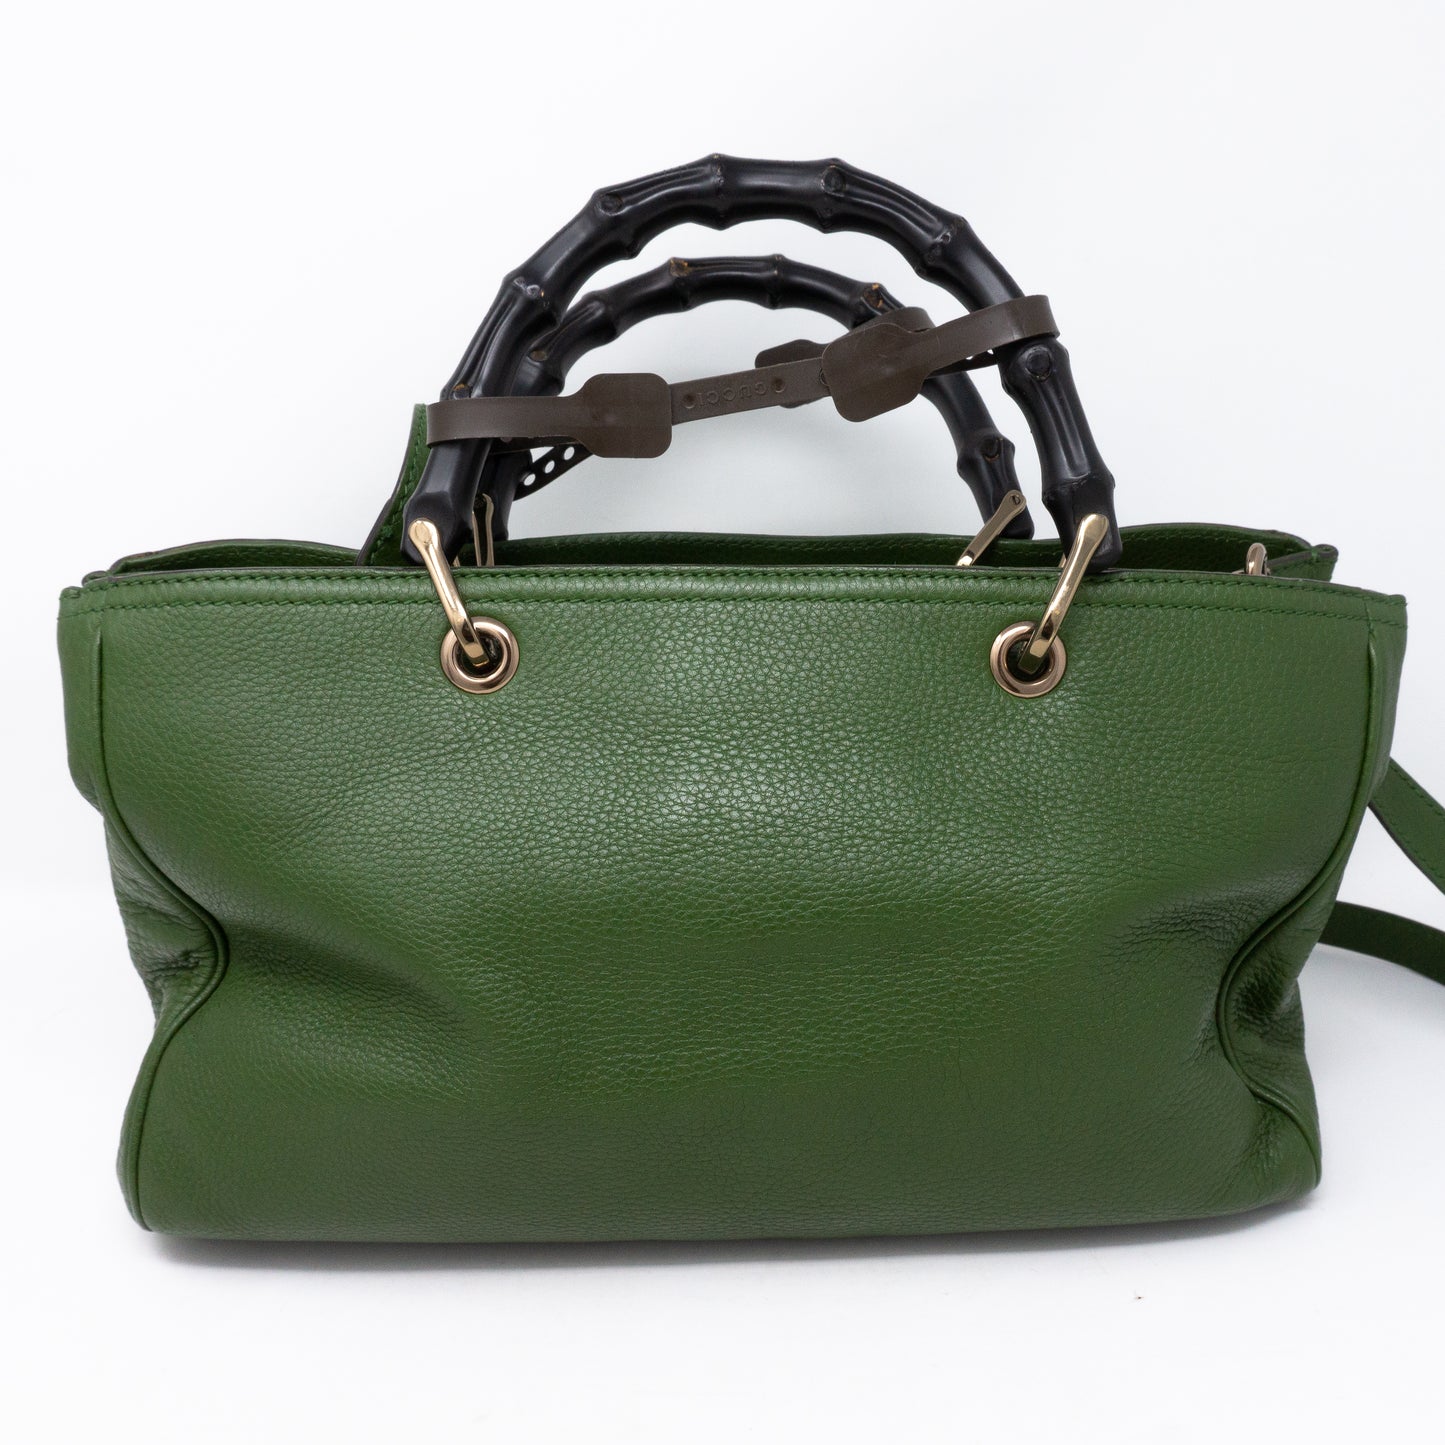 Bamboo Handle Tote Green Leather